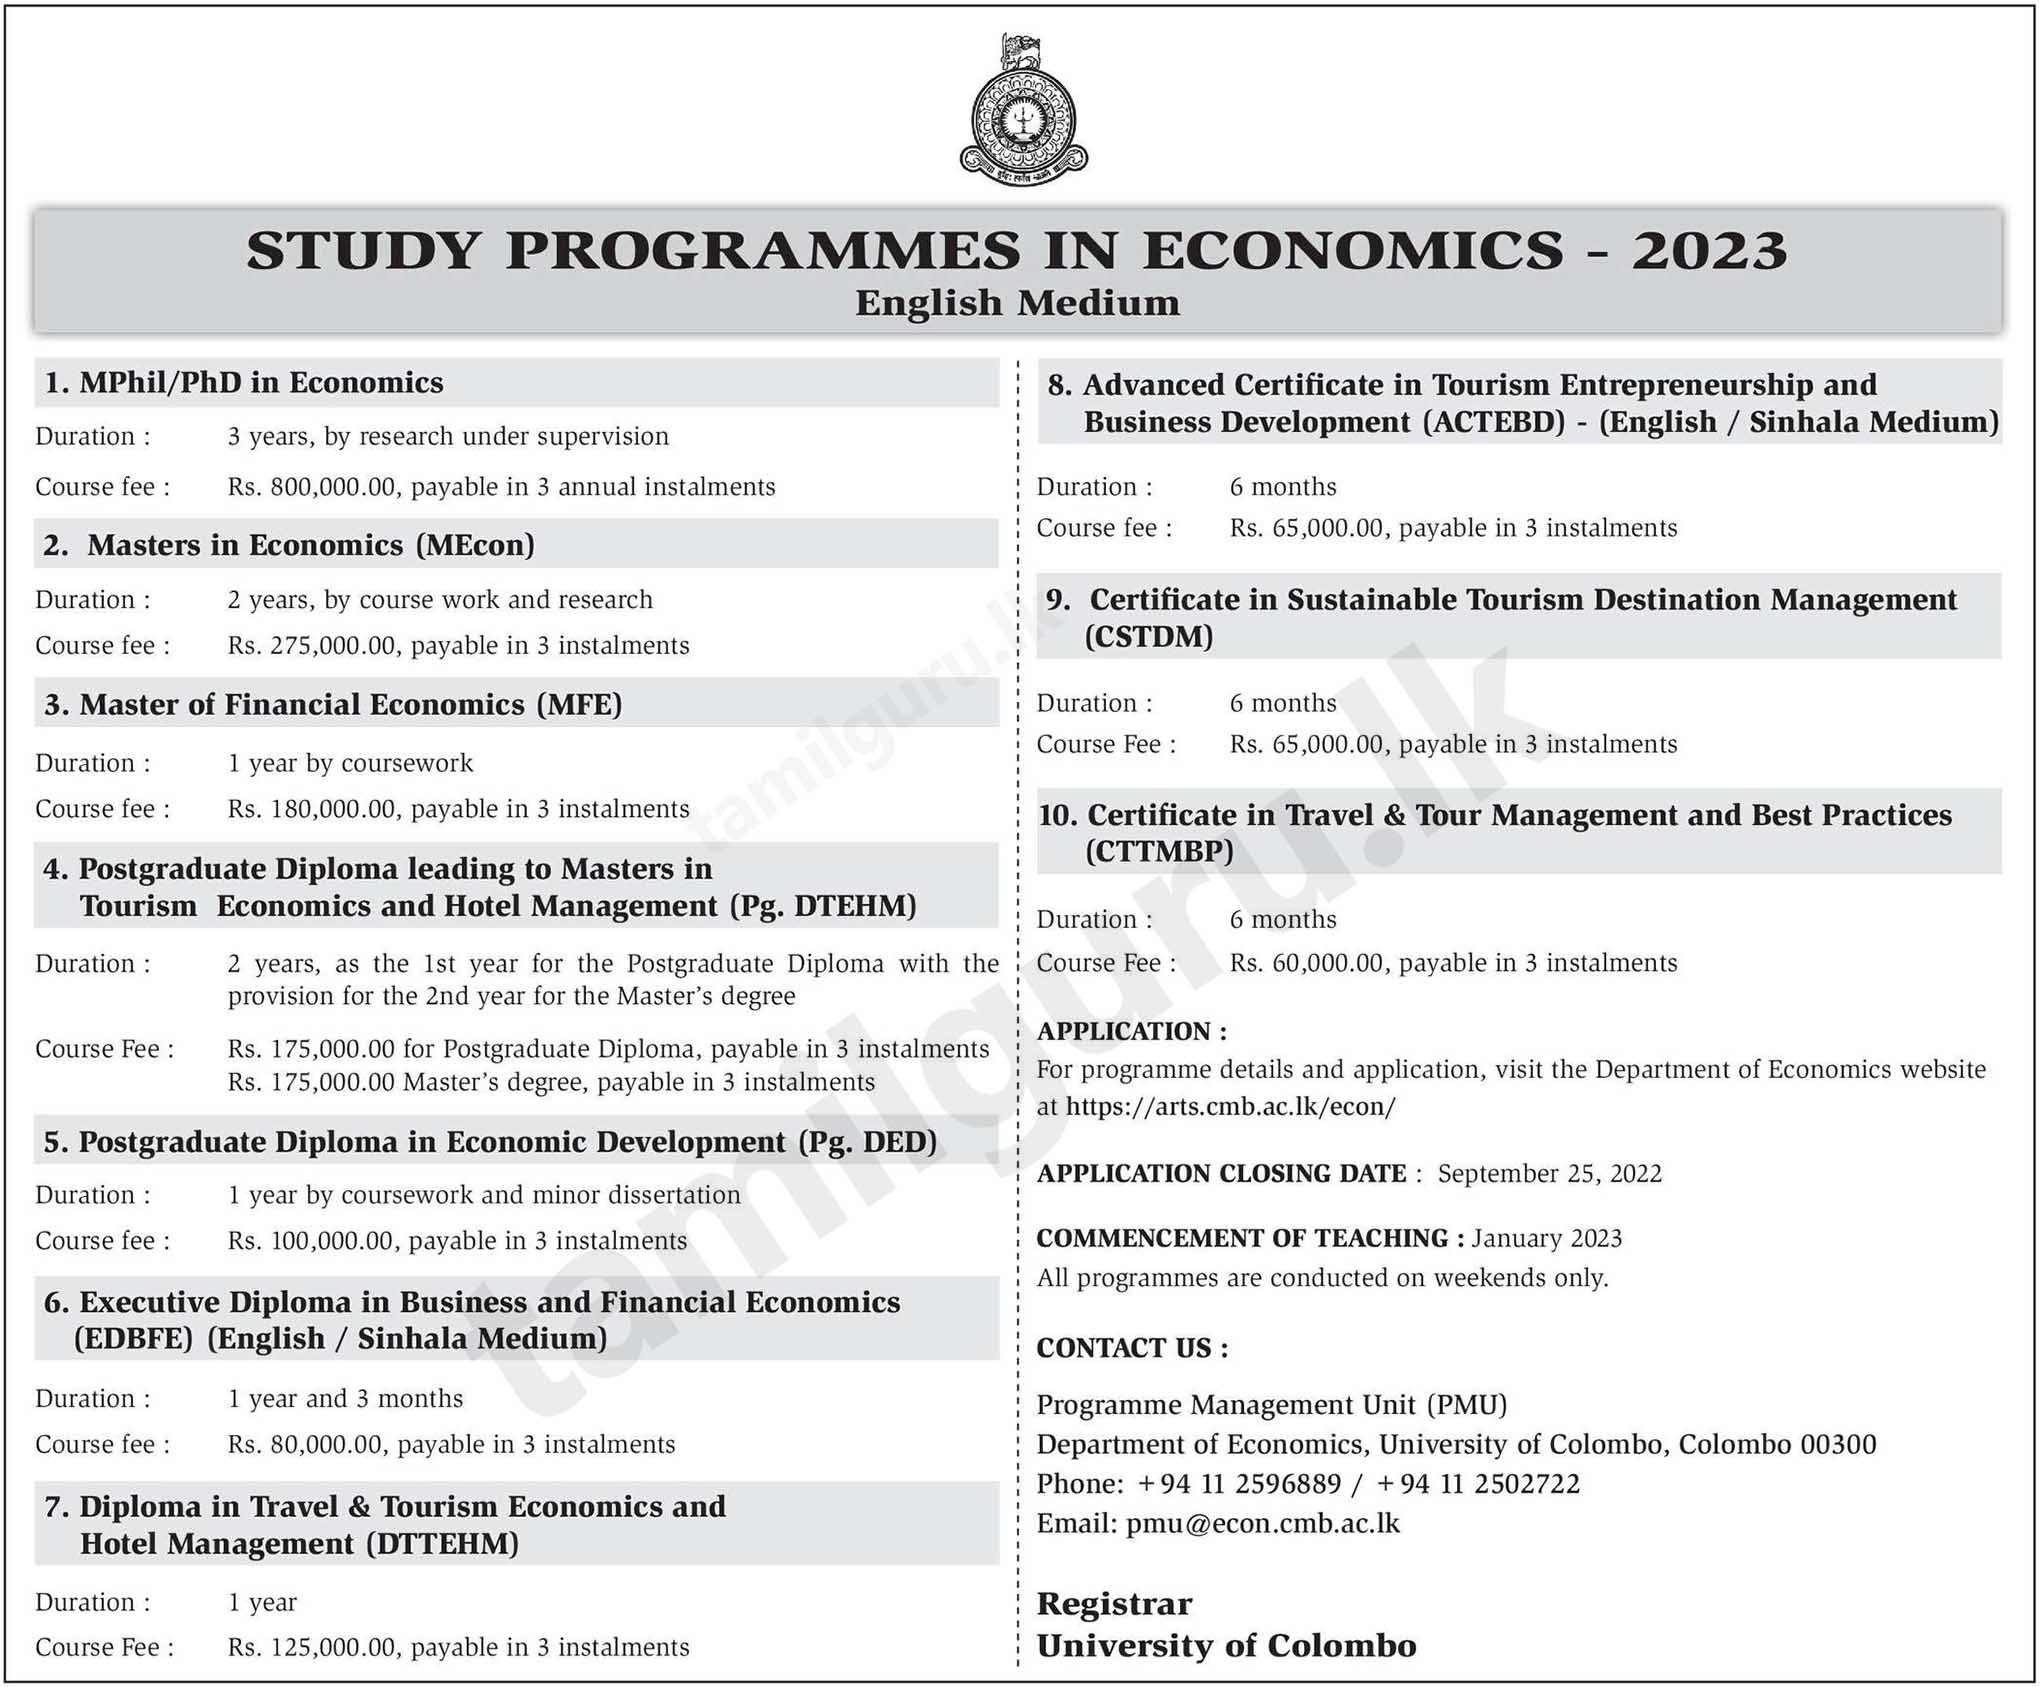 Calling Applications for Study Programmes in Economics (2022/2023) (Courses) - Department of Economics, University of Colombo